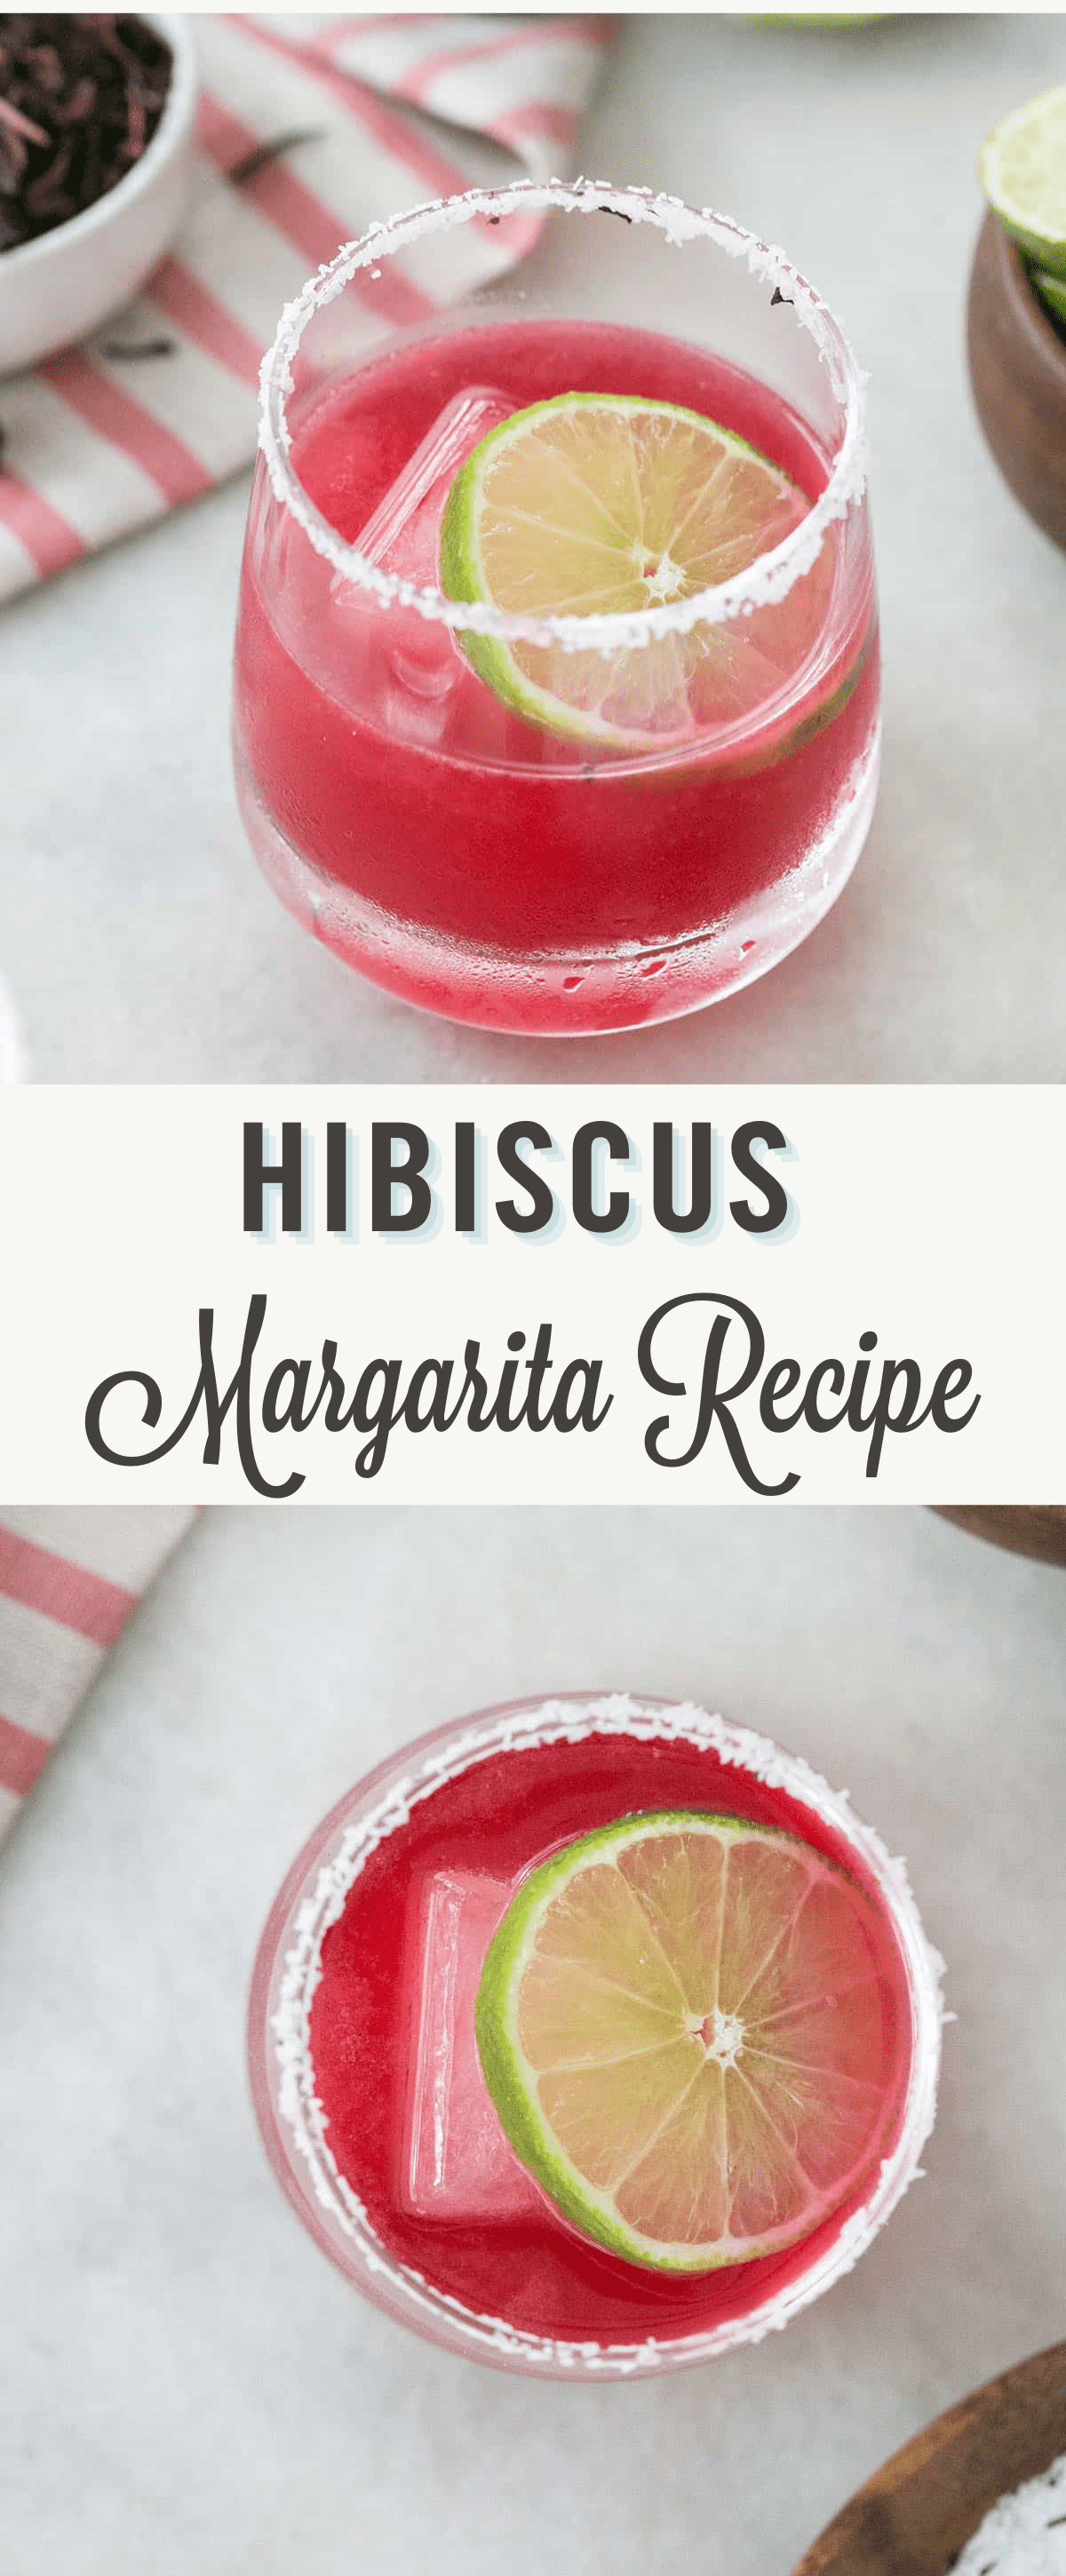 Hibiscus margarita with lime slice and a title.